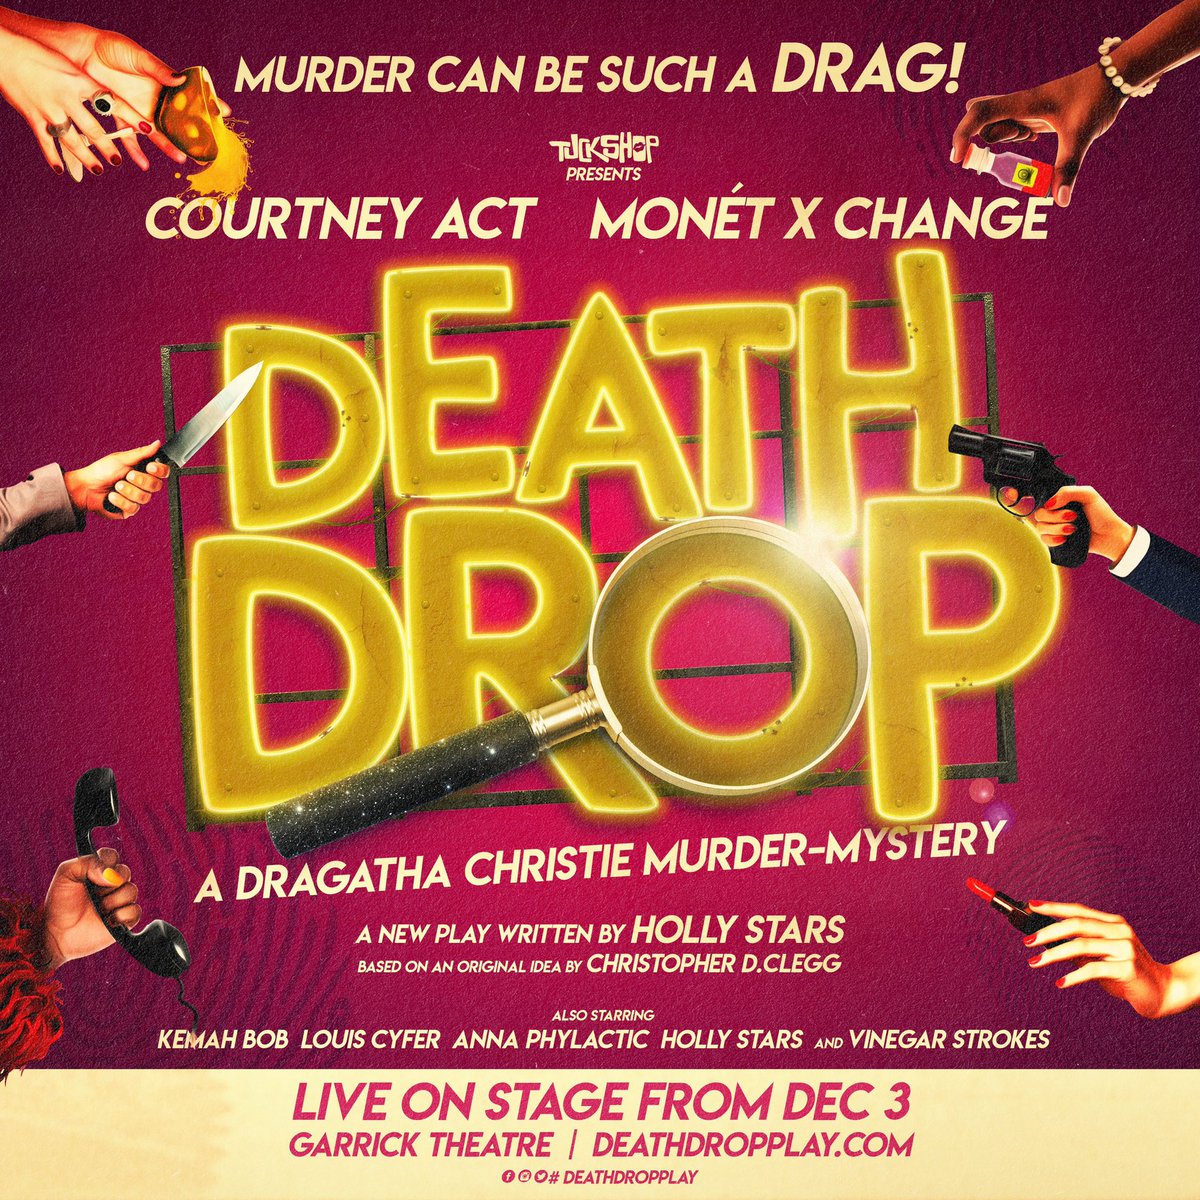 Bang, Bang...Bitch! Sooo excited to announce that I’ll be starring in @deathdropplay with an AMAZING cast. 
.
Coming to the @garricktheatre in London from Dec. 3rd. 
.
Tickets available at DeathDropPlay.com